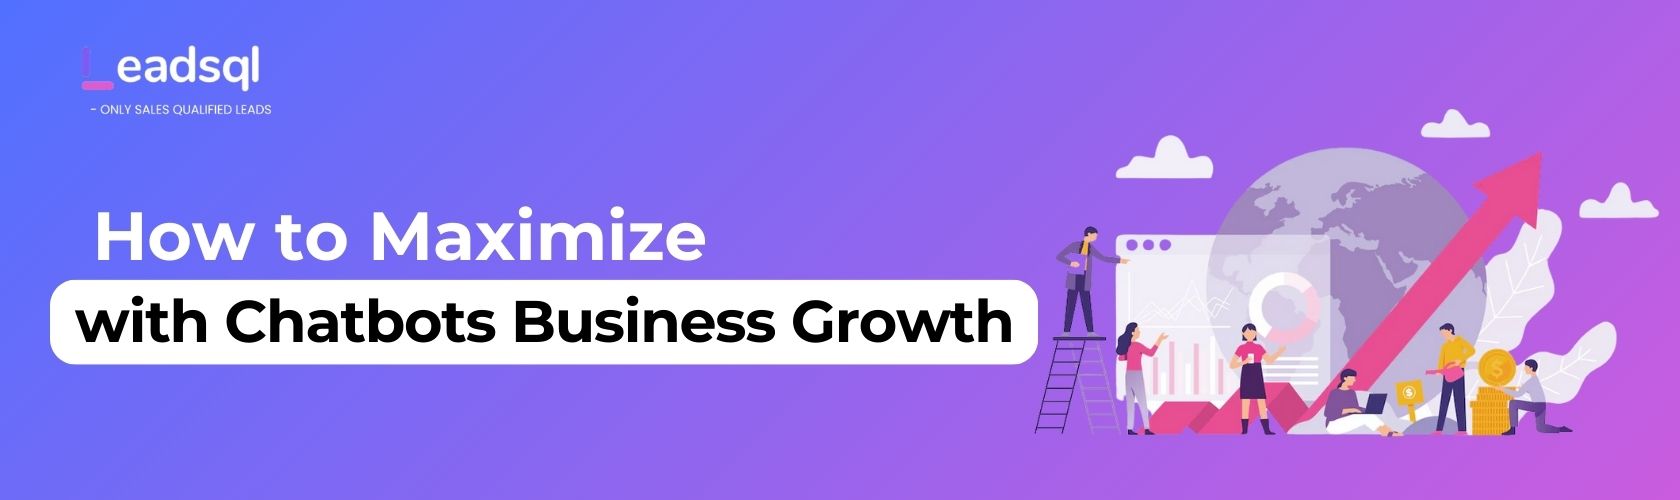 How to Maximize Business Growth with Chatbots